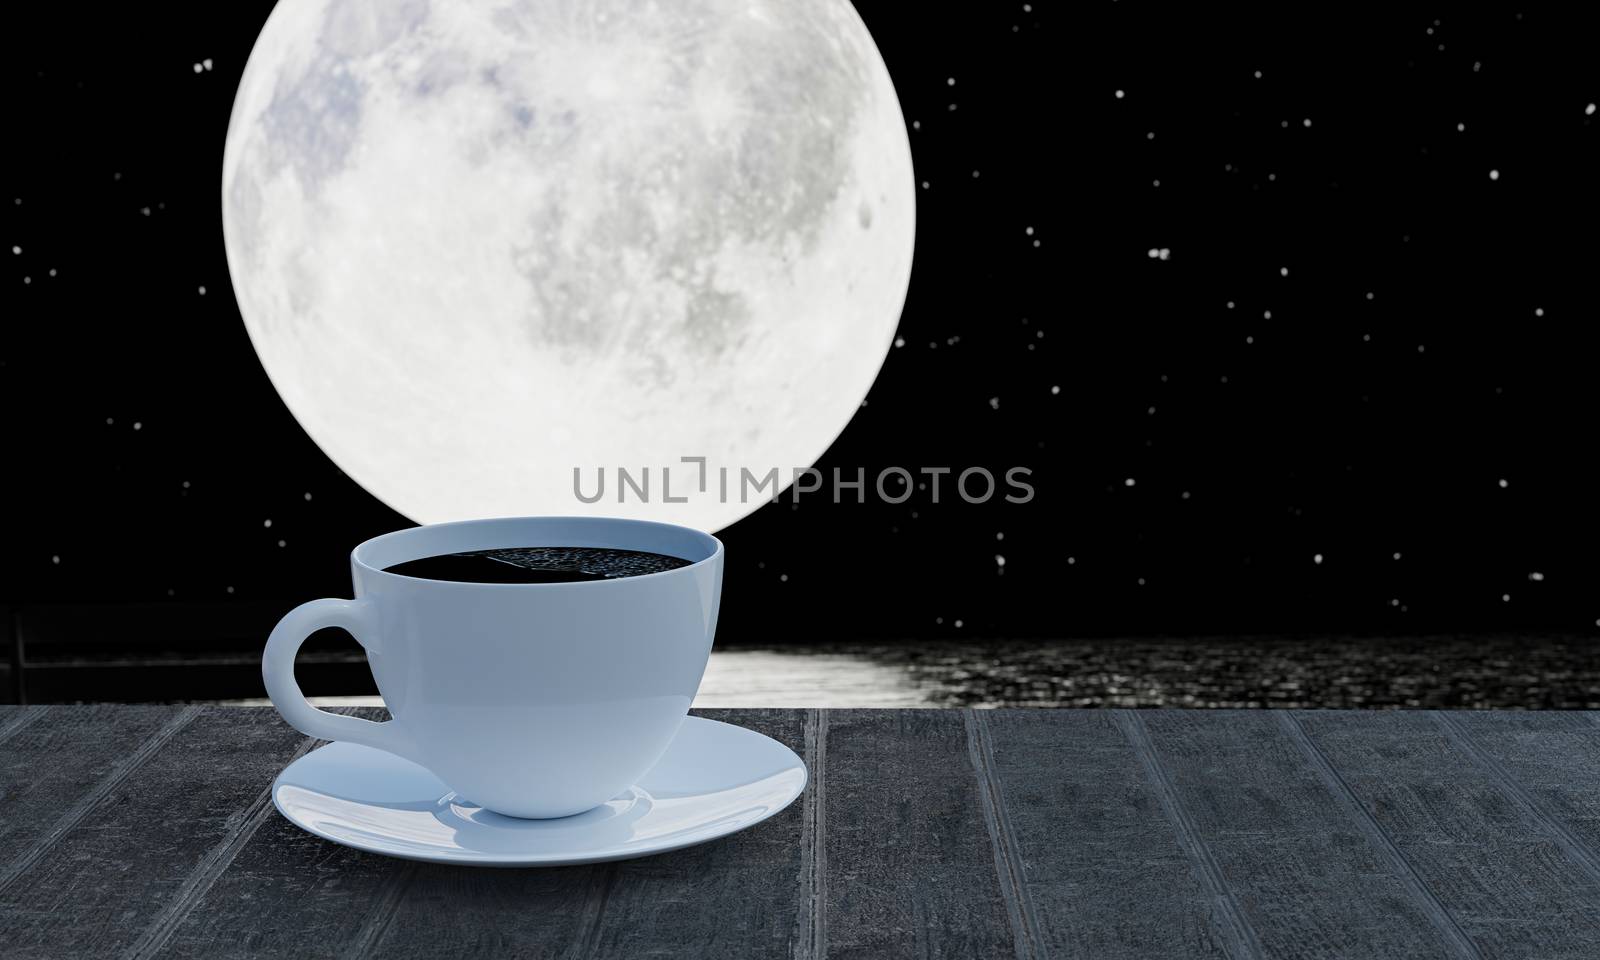 Black coffee in a white coffee mug with saucer Put on the table, by ridersuperone